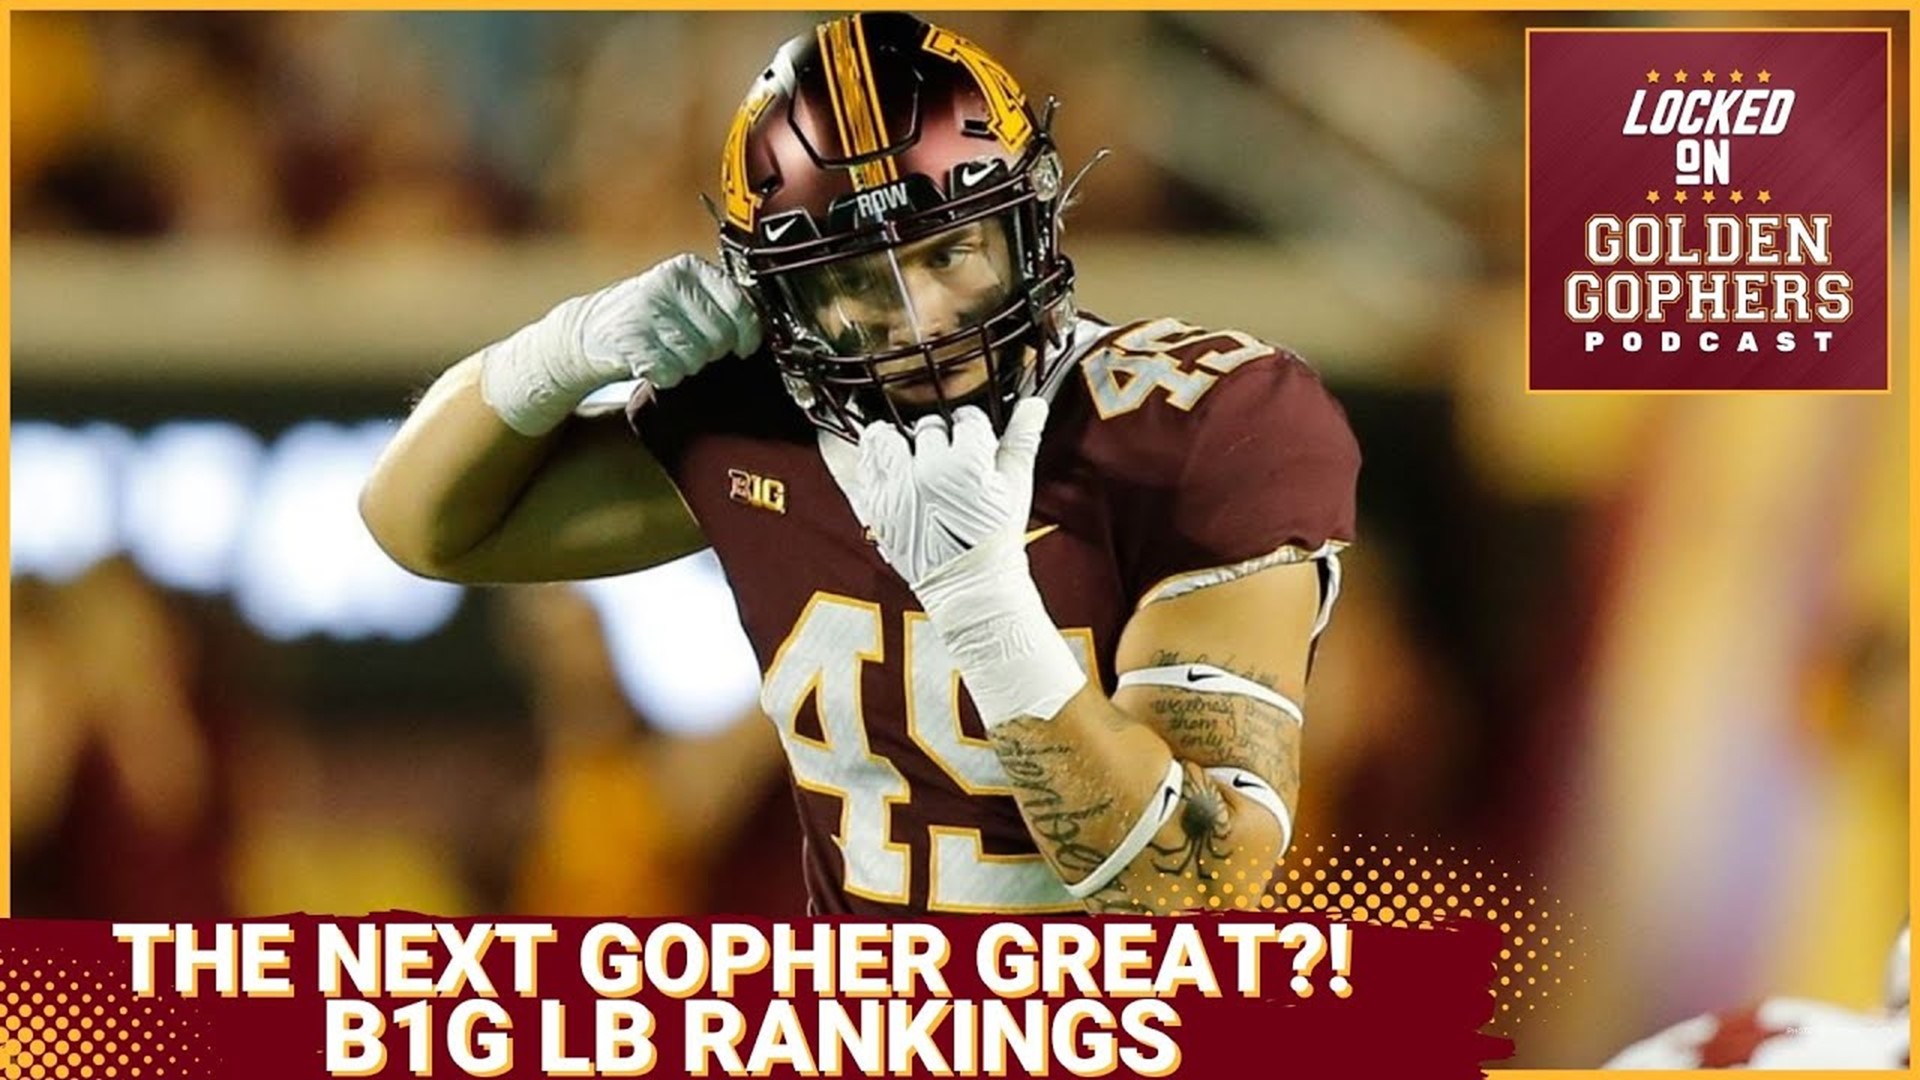 On today's episode of Locked On Golden Gophers, I discuss why Cody Lindenberg could be a Minnesota Gopher great at the line backer position.